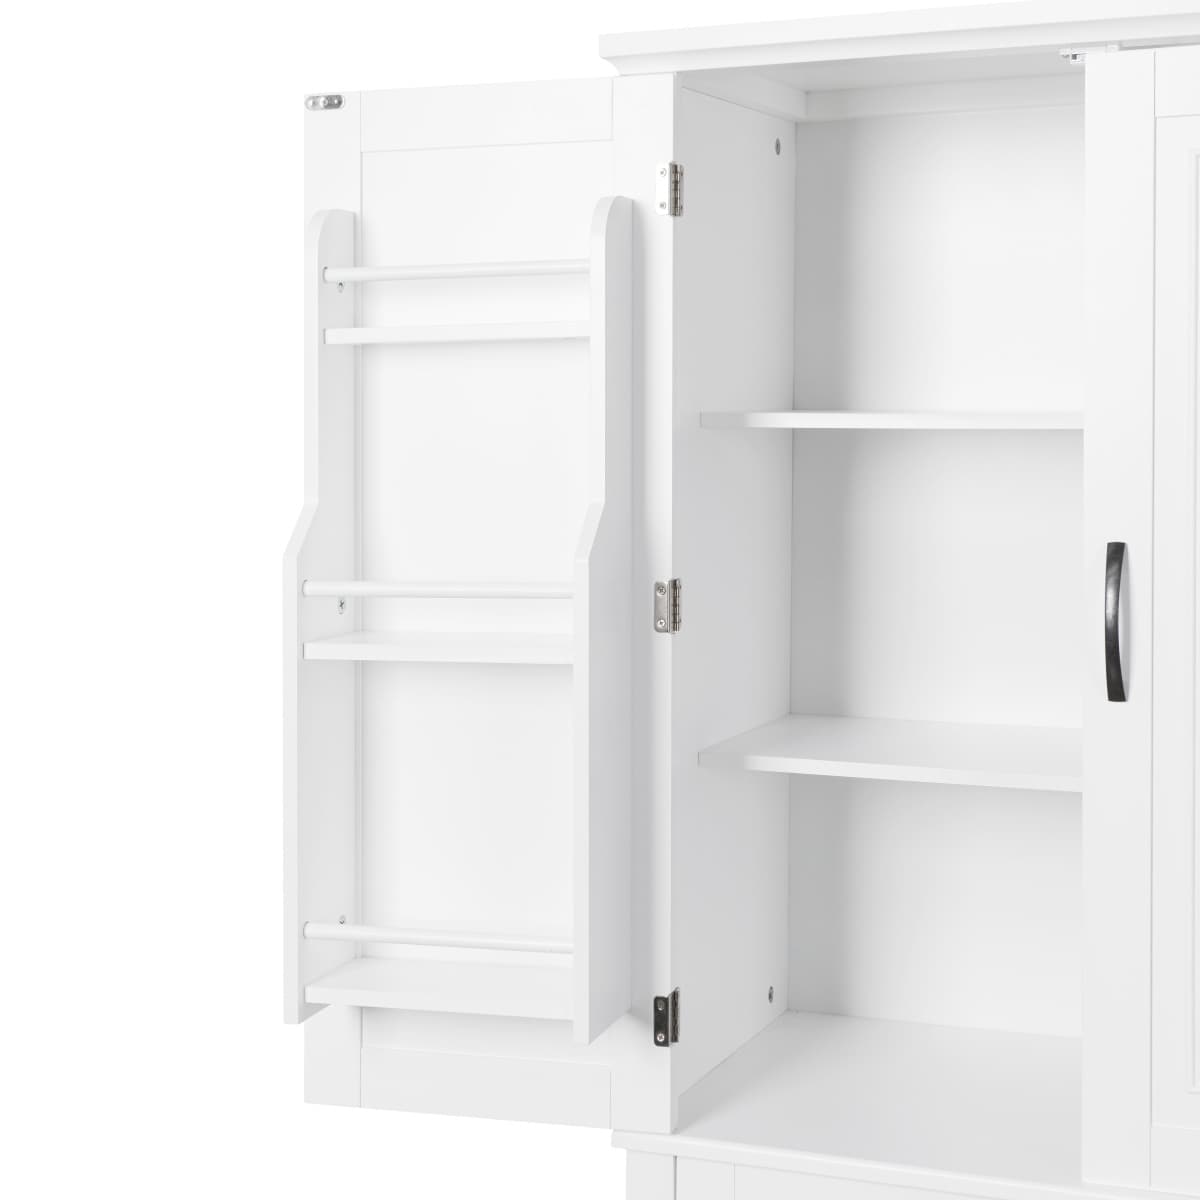 https://ak1.ostkcdn.com/images/products/is/images/direct/67e10a30a1c86d90b7b6da465c841d96b66397a2/Modern-White-Bathroom-Storage-Cabinet-with-4-Doors%2C-Drawer%2C-Adjustable-Shelf-and-Storage-Racks%2C-Luxury-Bathroom-Cabinet.jpg